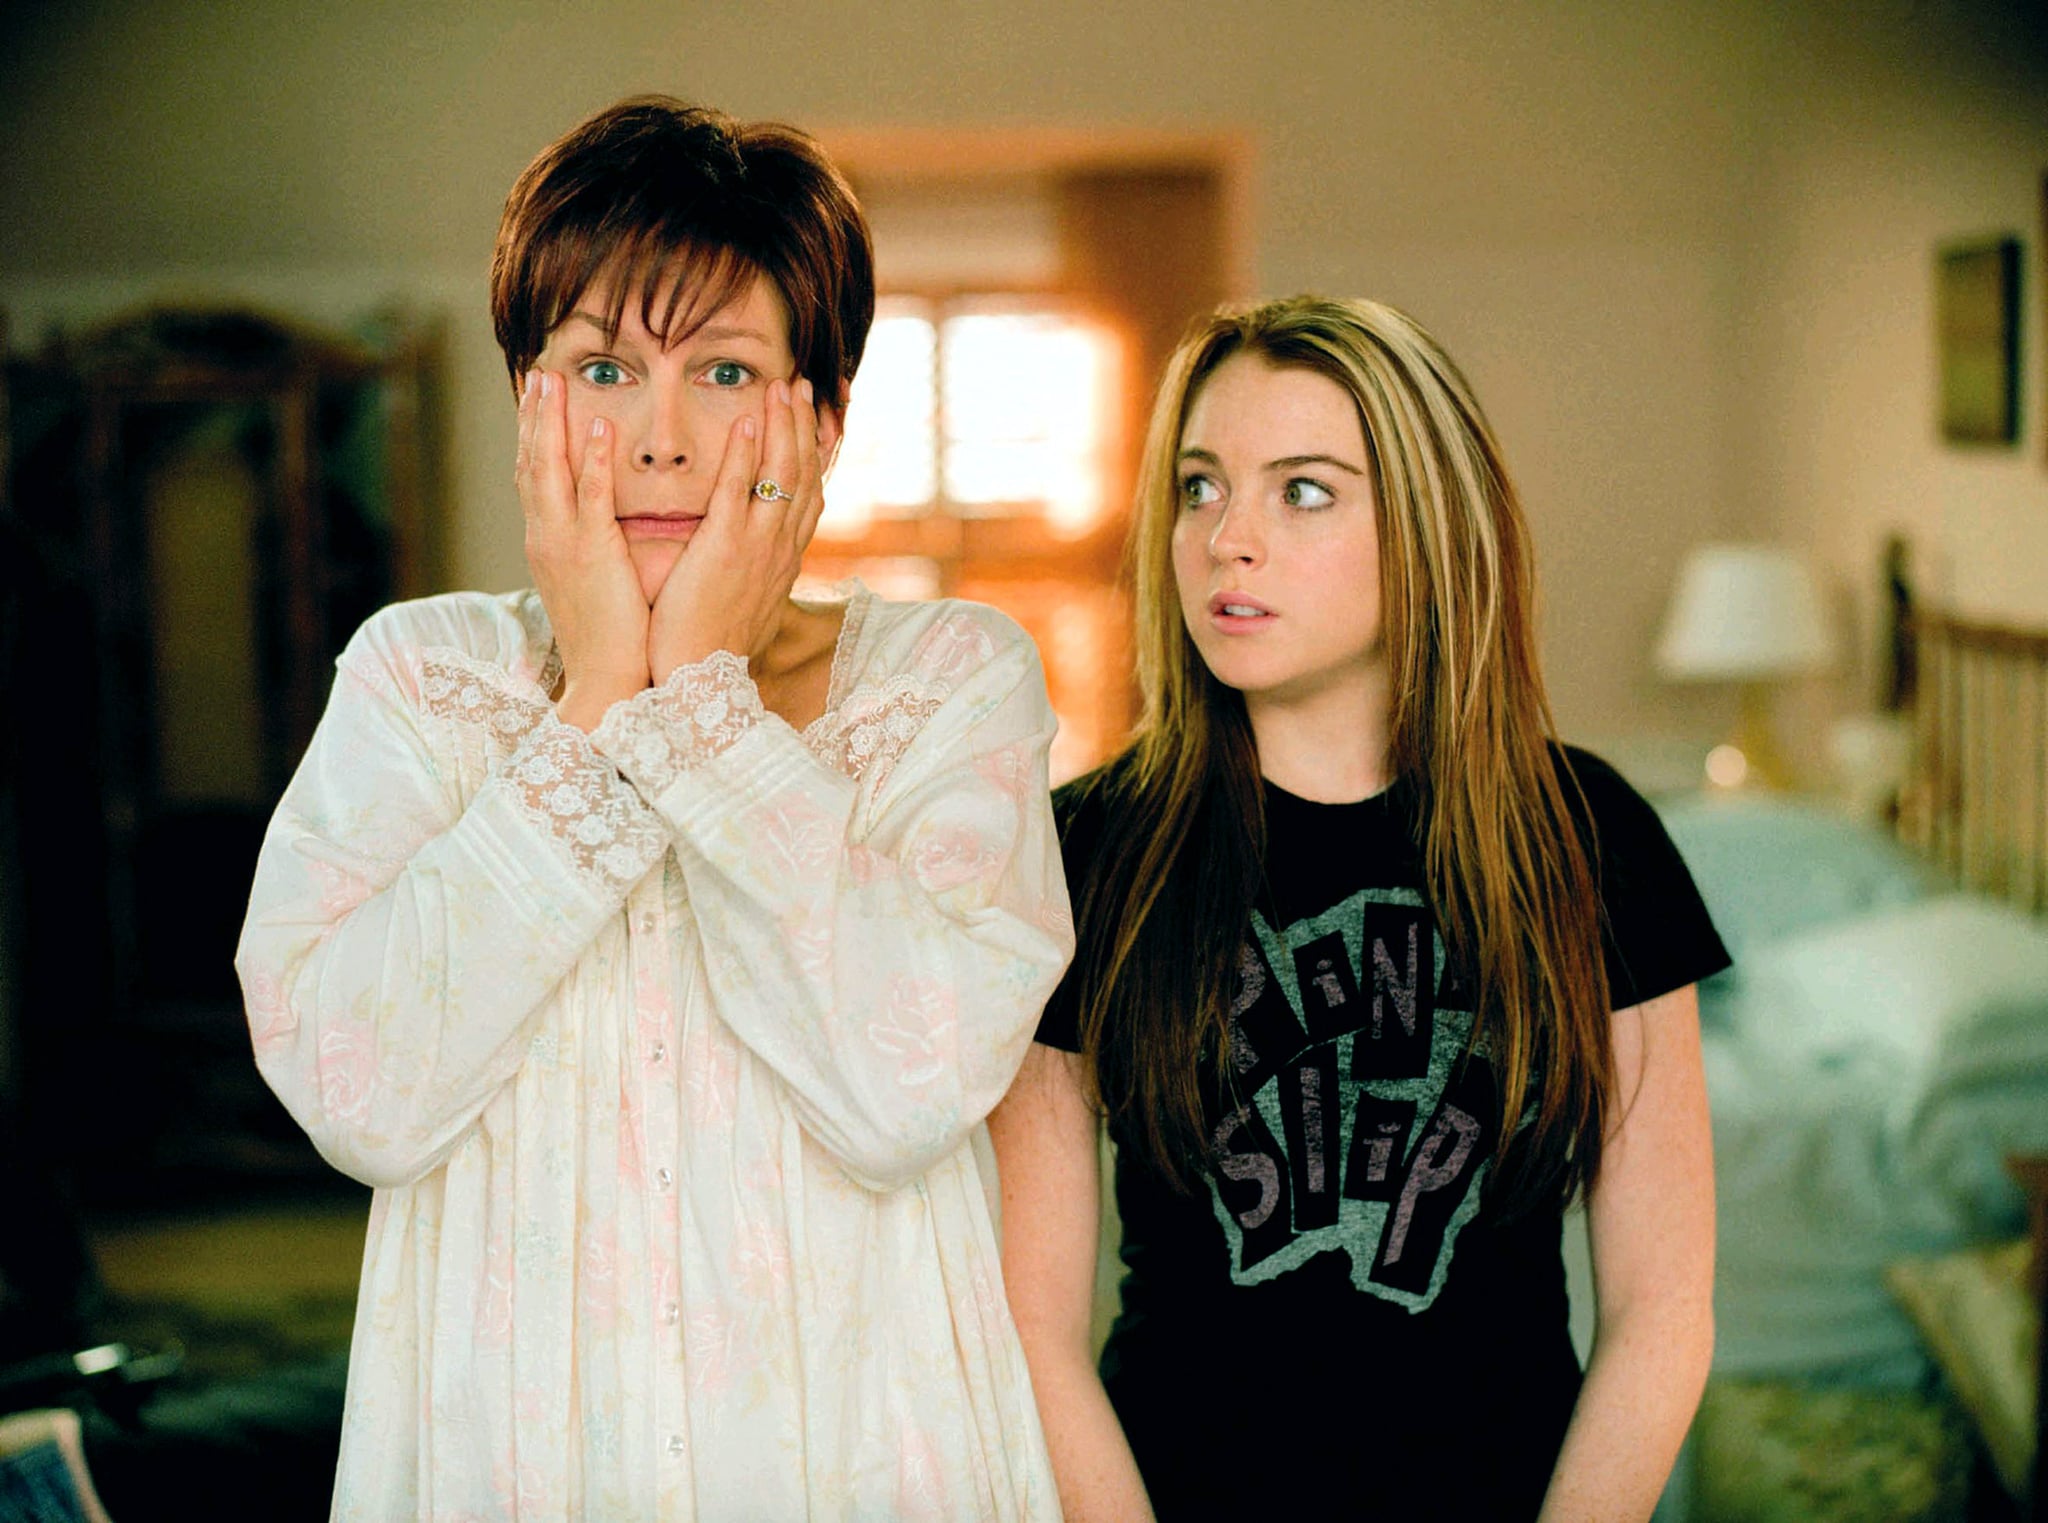 Jamie Lee Curtis Says She Would “Absolutely” Do a “Freaky Friday” Sequel With Pal Lindsay Lohan